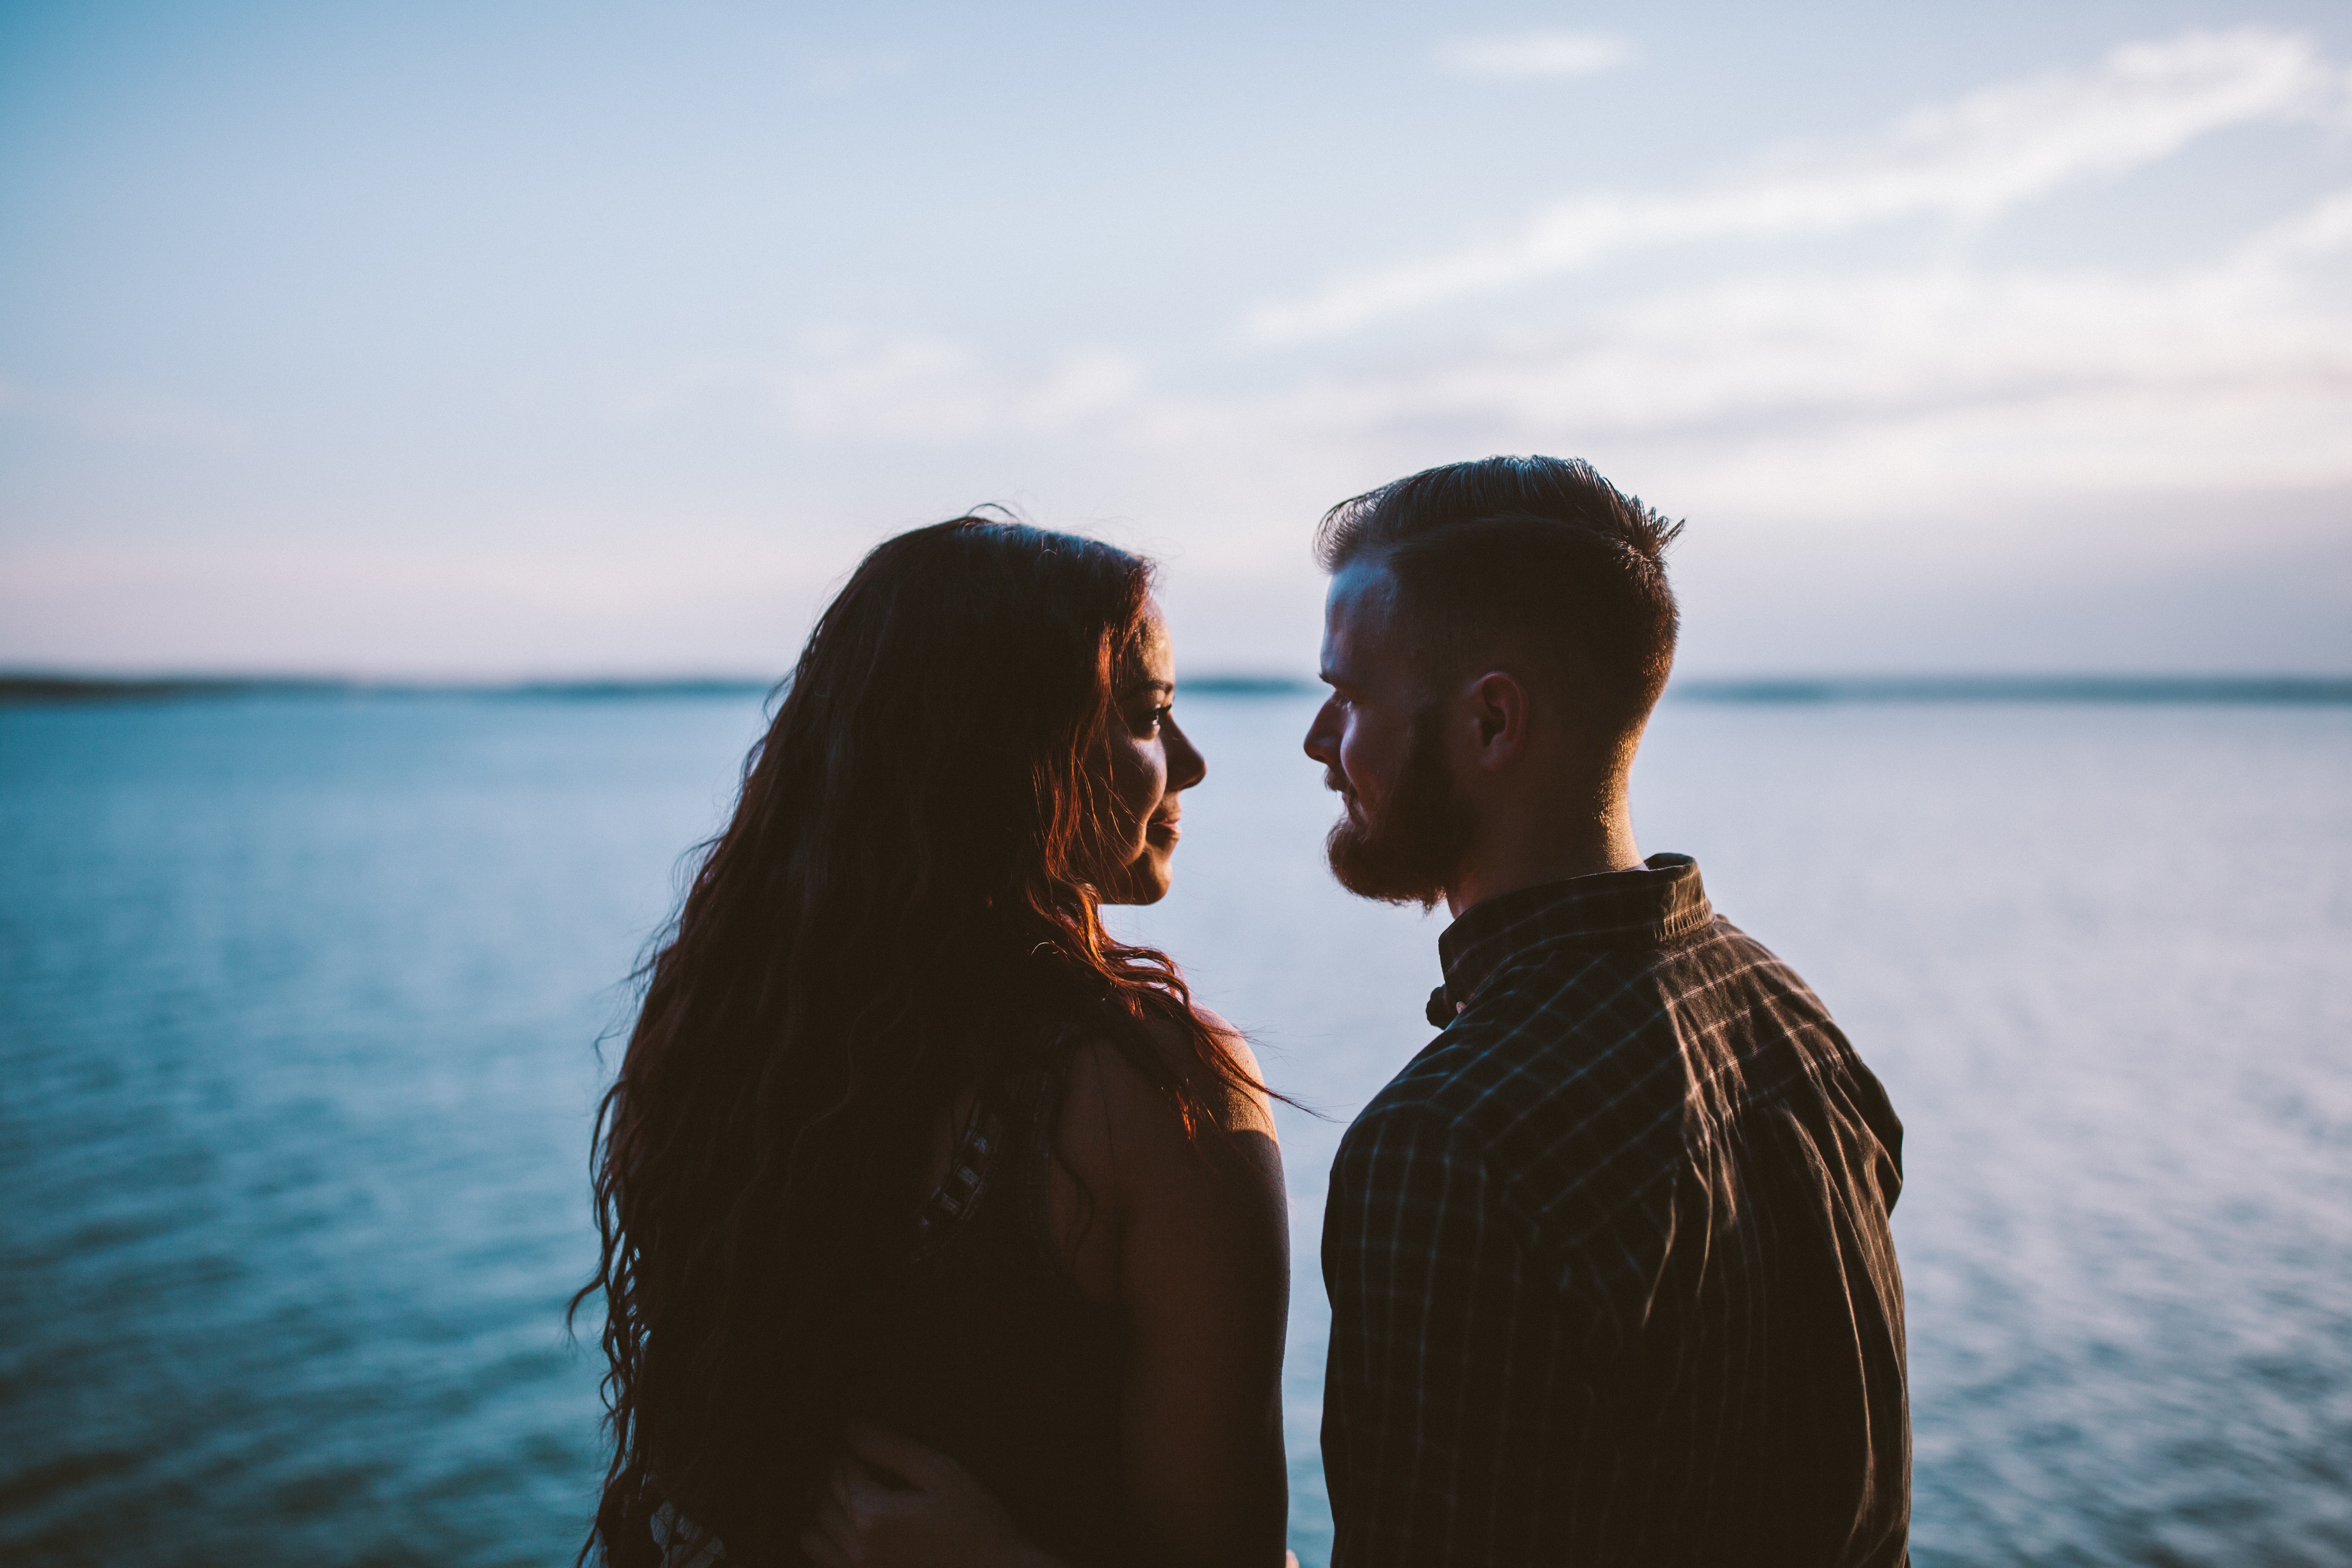 Man And Woman Looking At Each Other. | Source: Unsplash